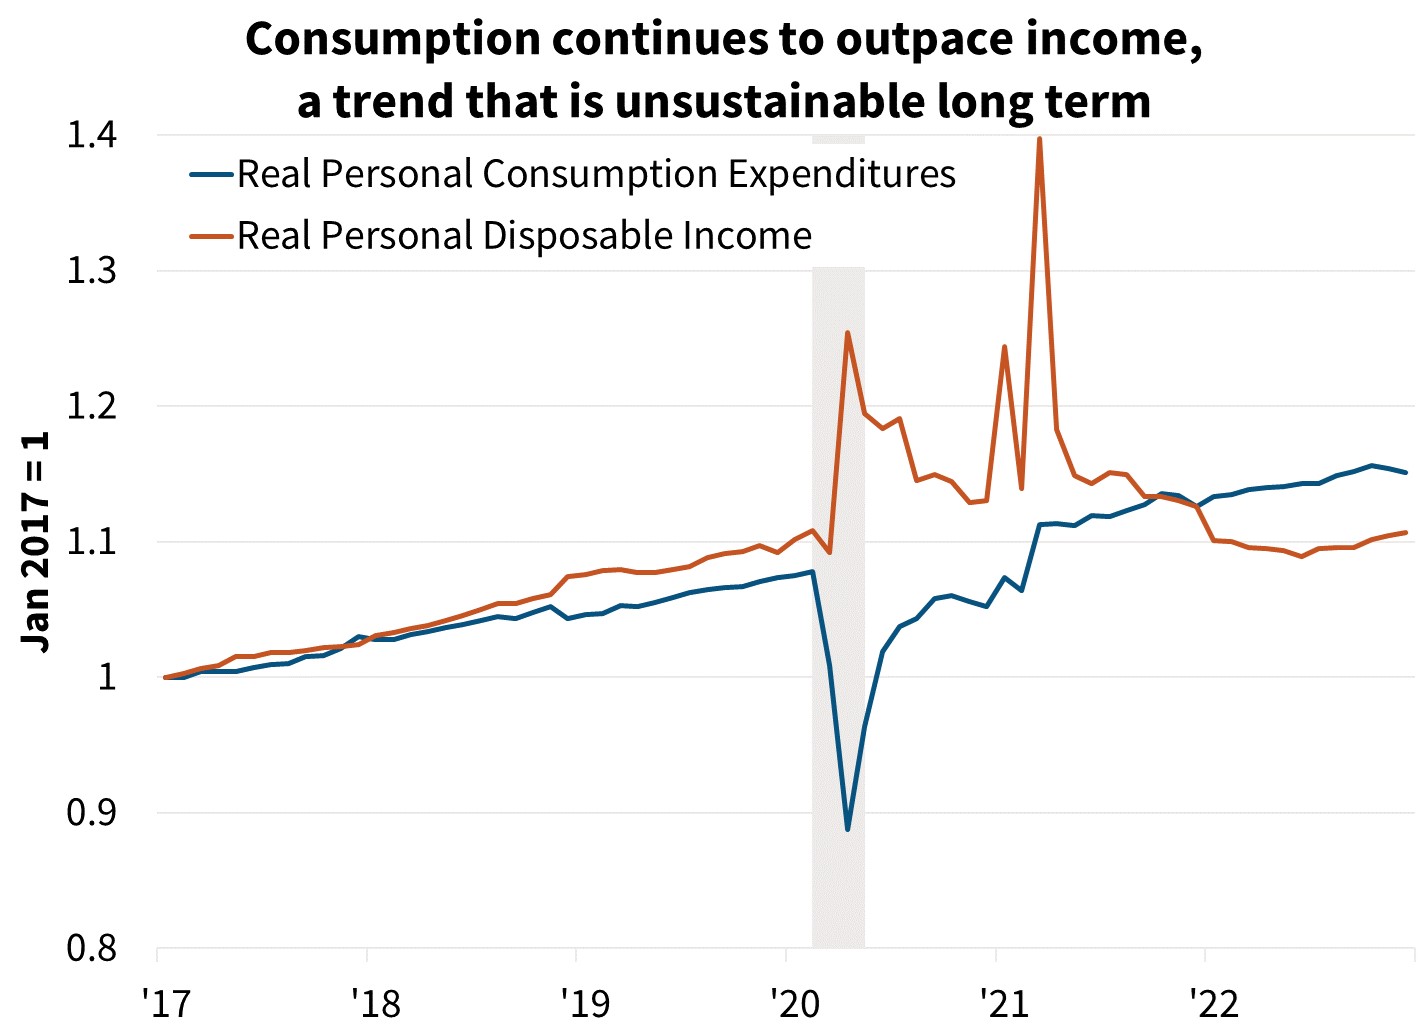  Consumption continues to outpace income, a trend that is unsustainable long term 